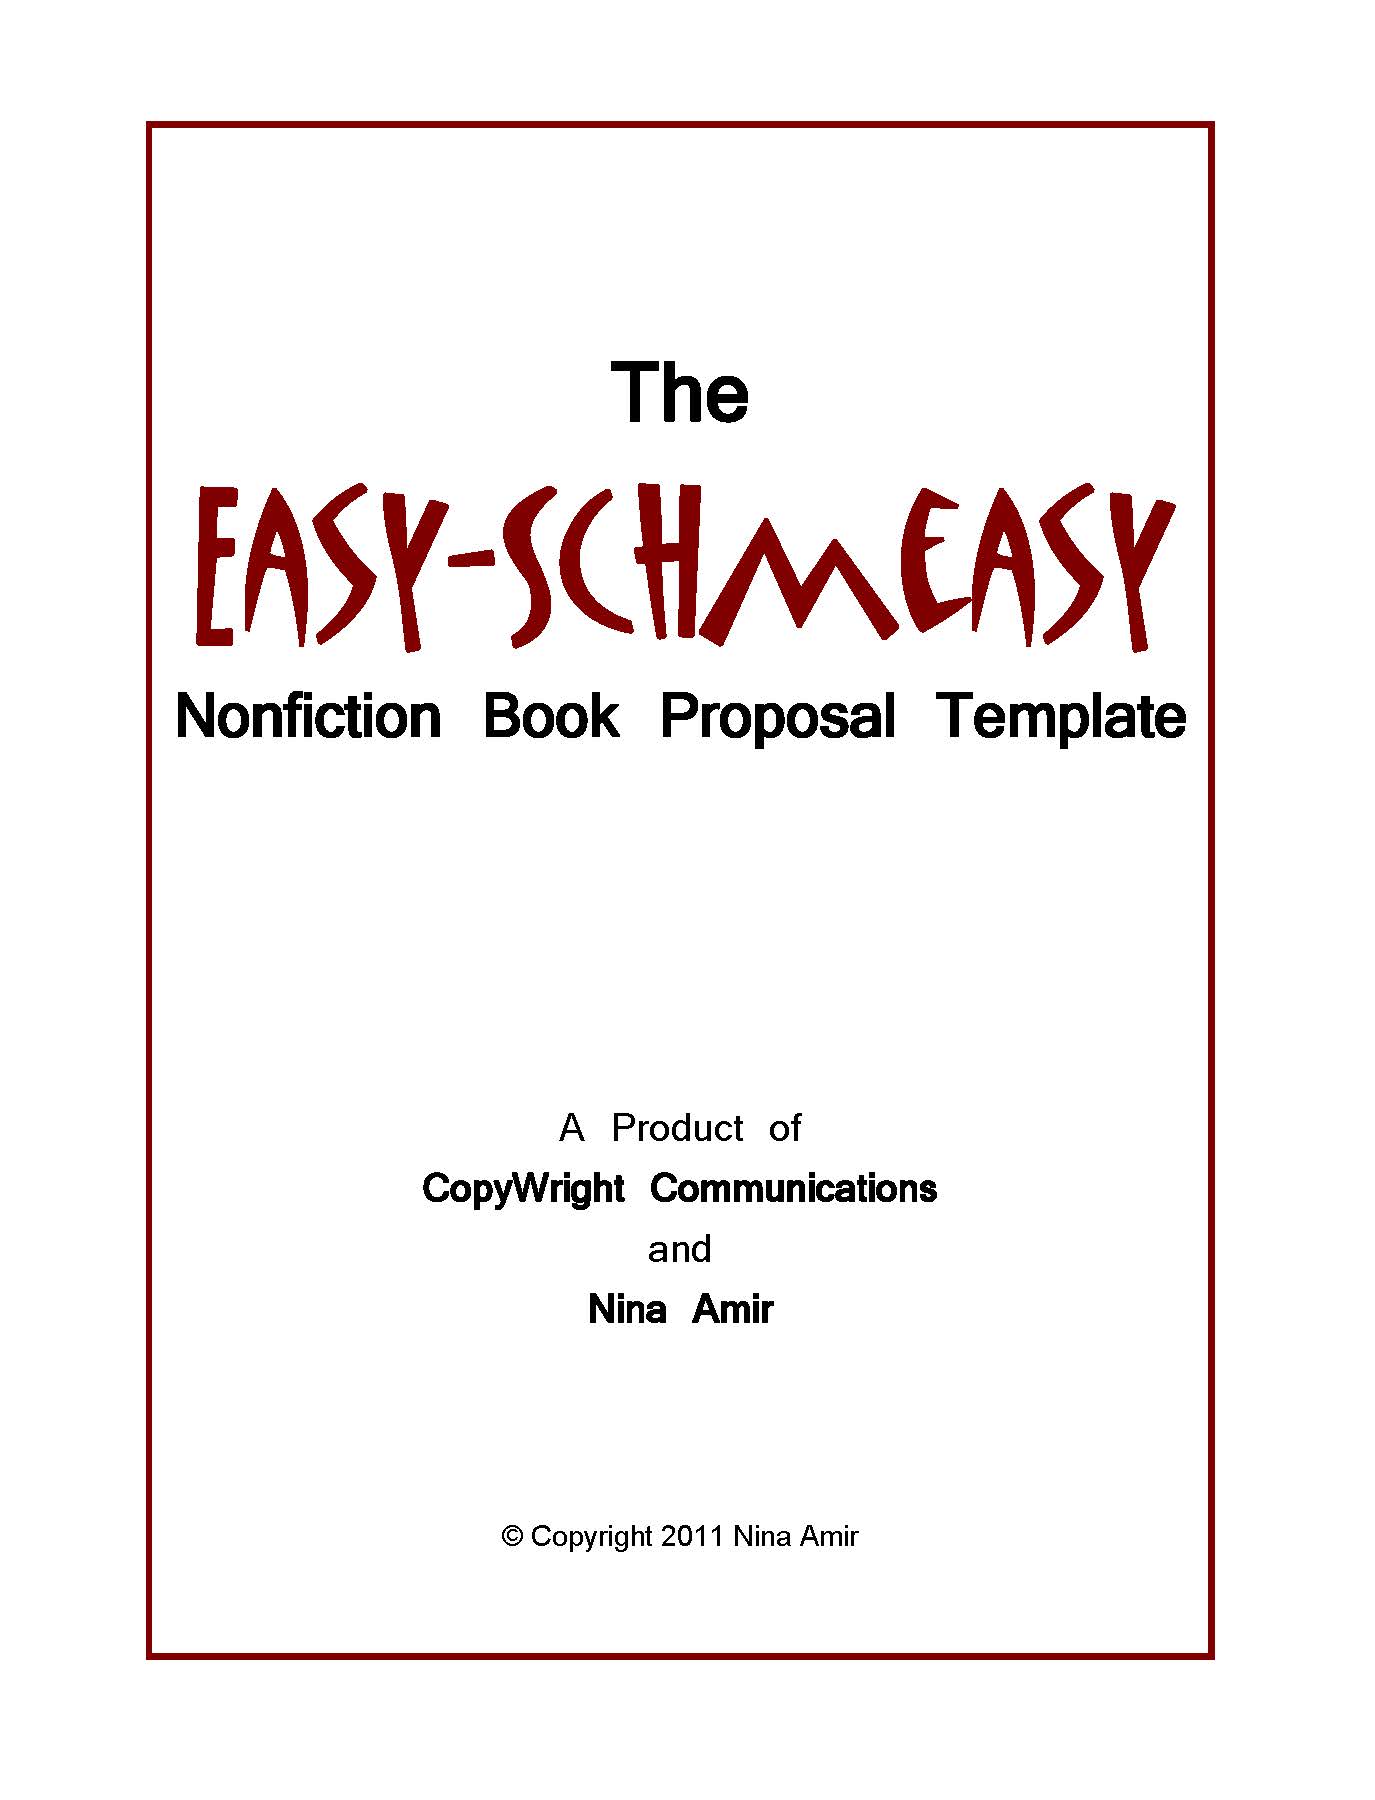 Easy Schmeasy Book Proposal cover